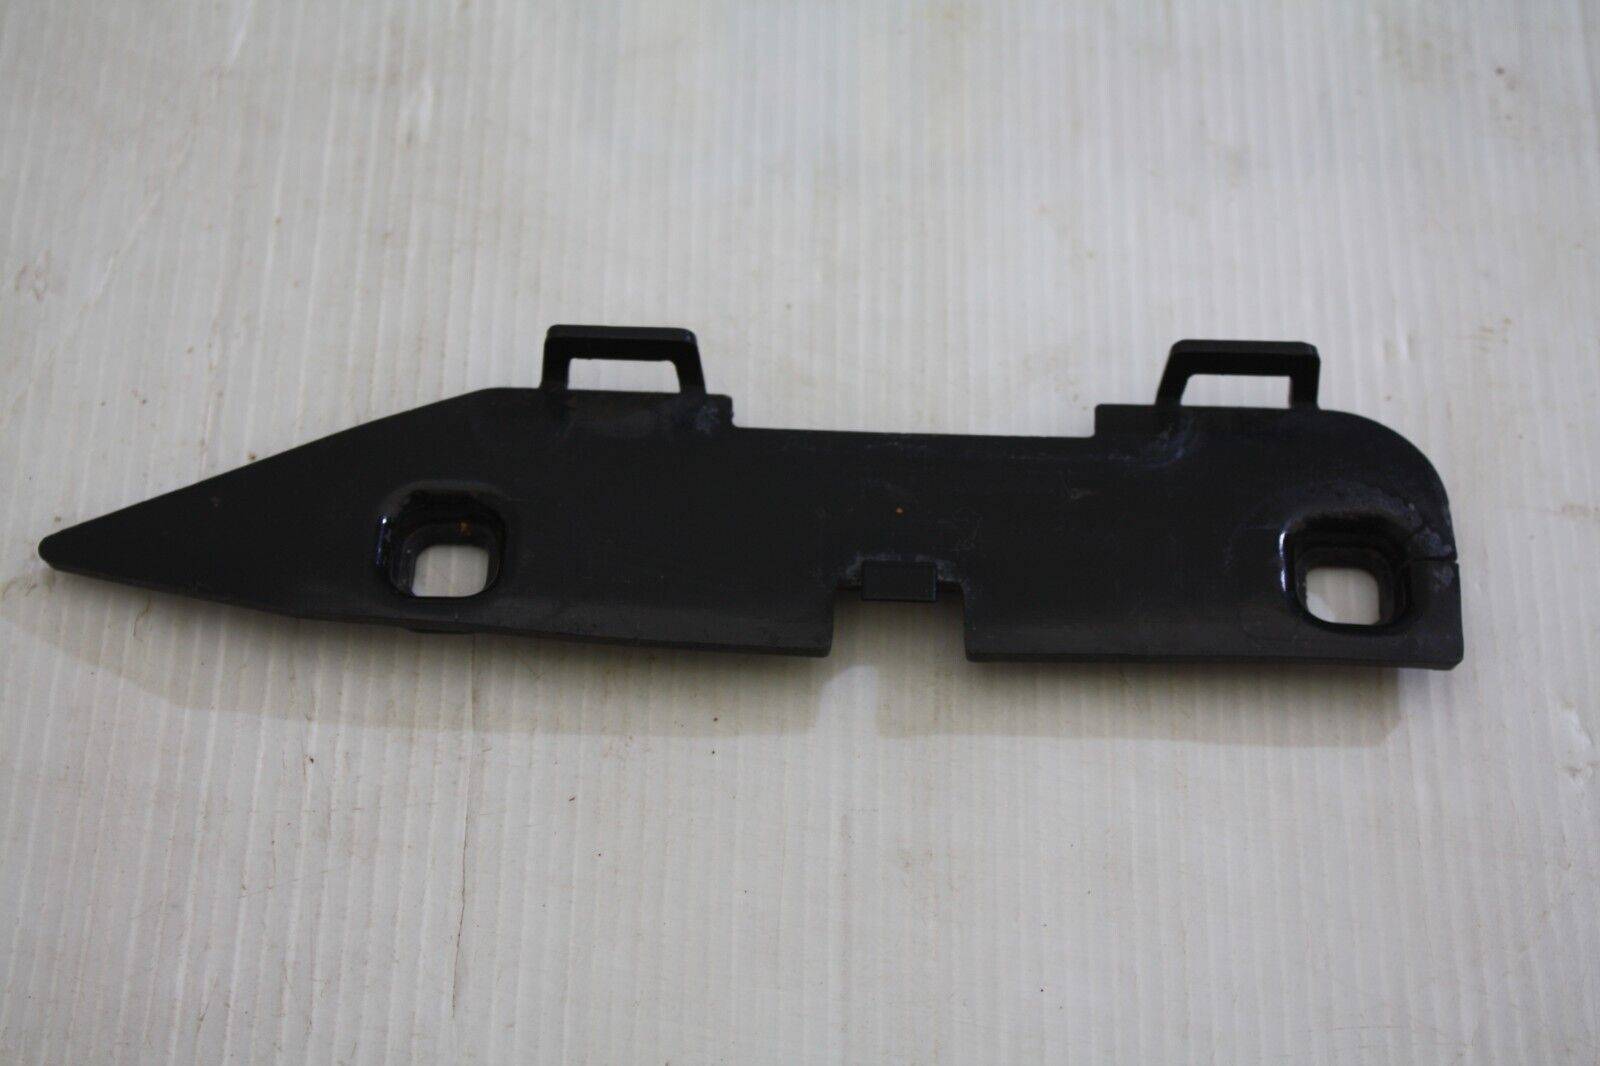 BMW X1 F48 Front Bumper Right Fixing Bracket 2015 To 2019 51117301576 Genuine 176355690969